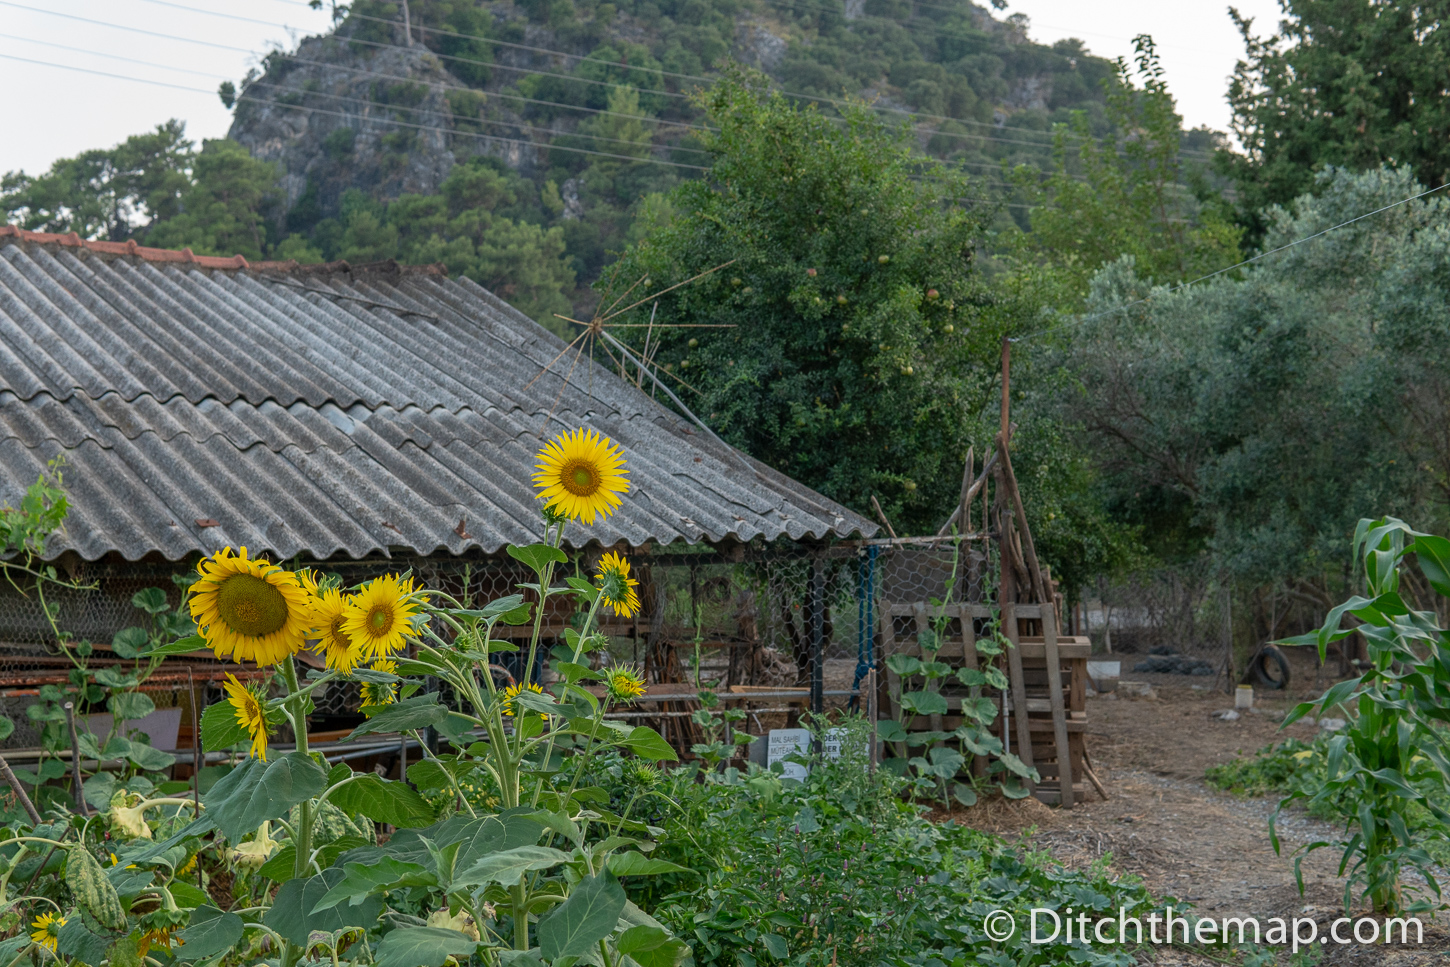 Sunflowers and farmhouse in Turkey